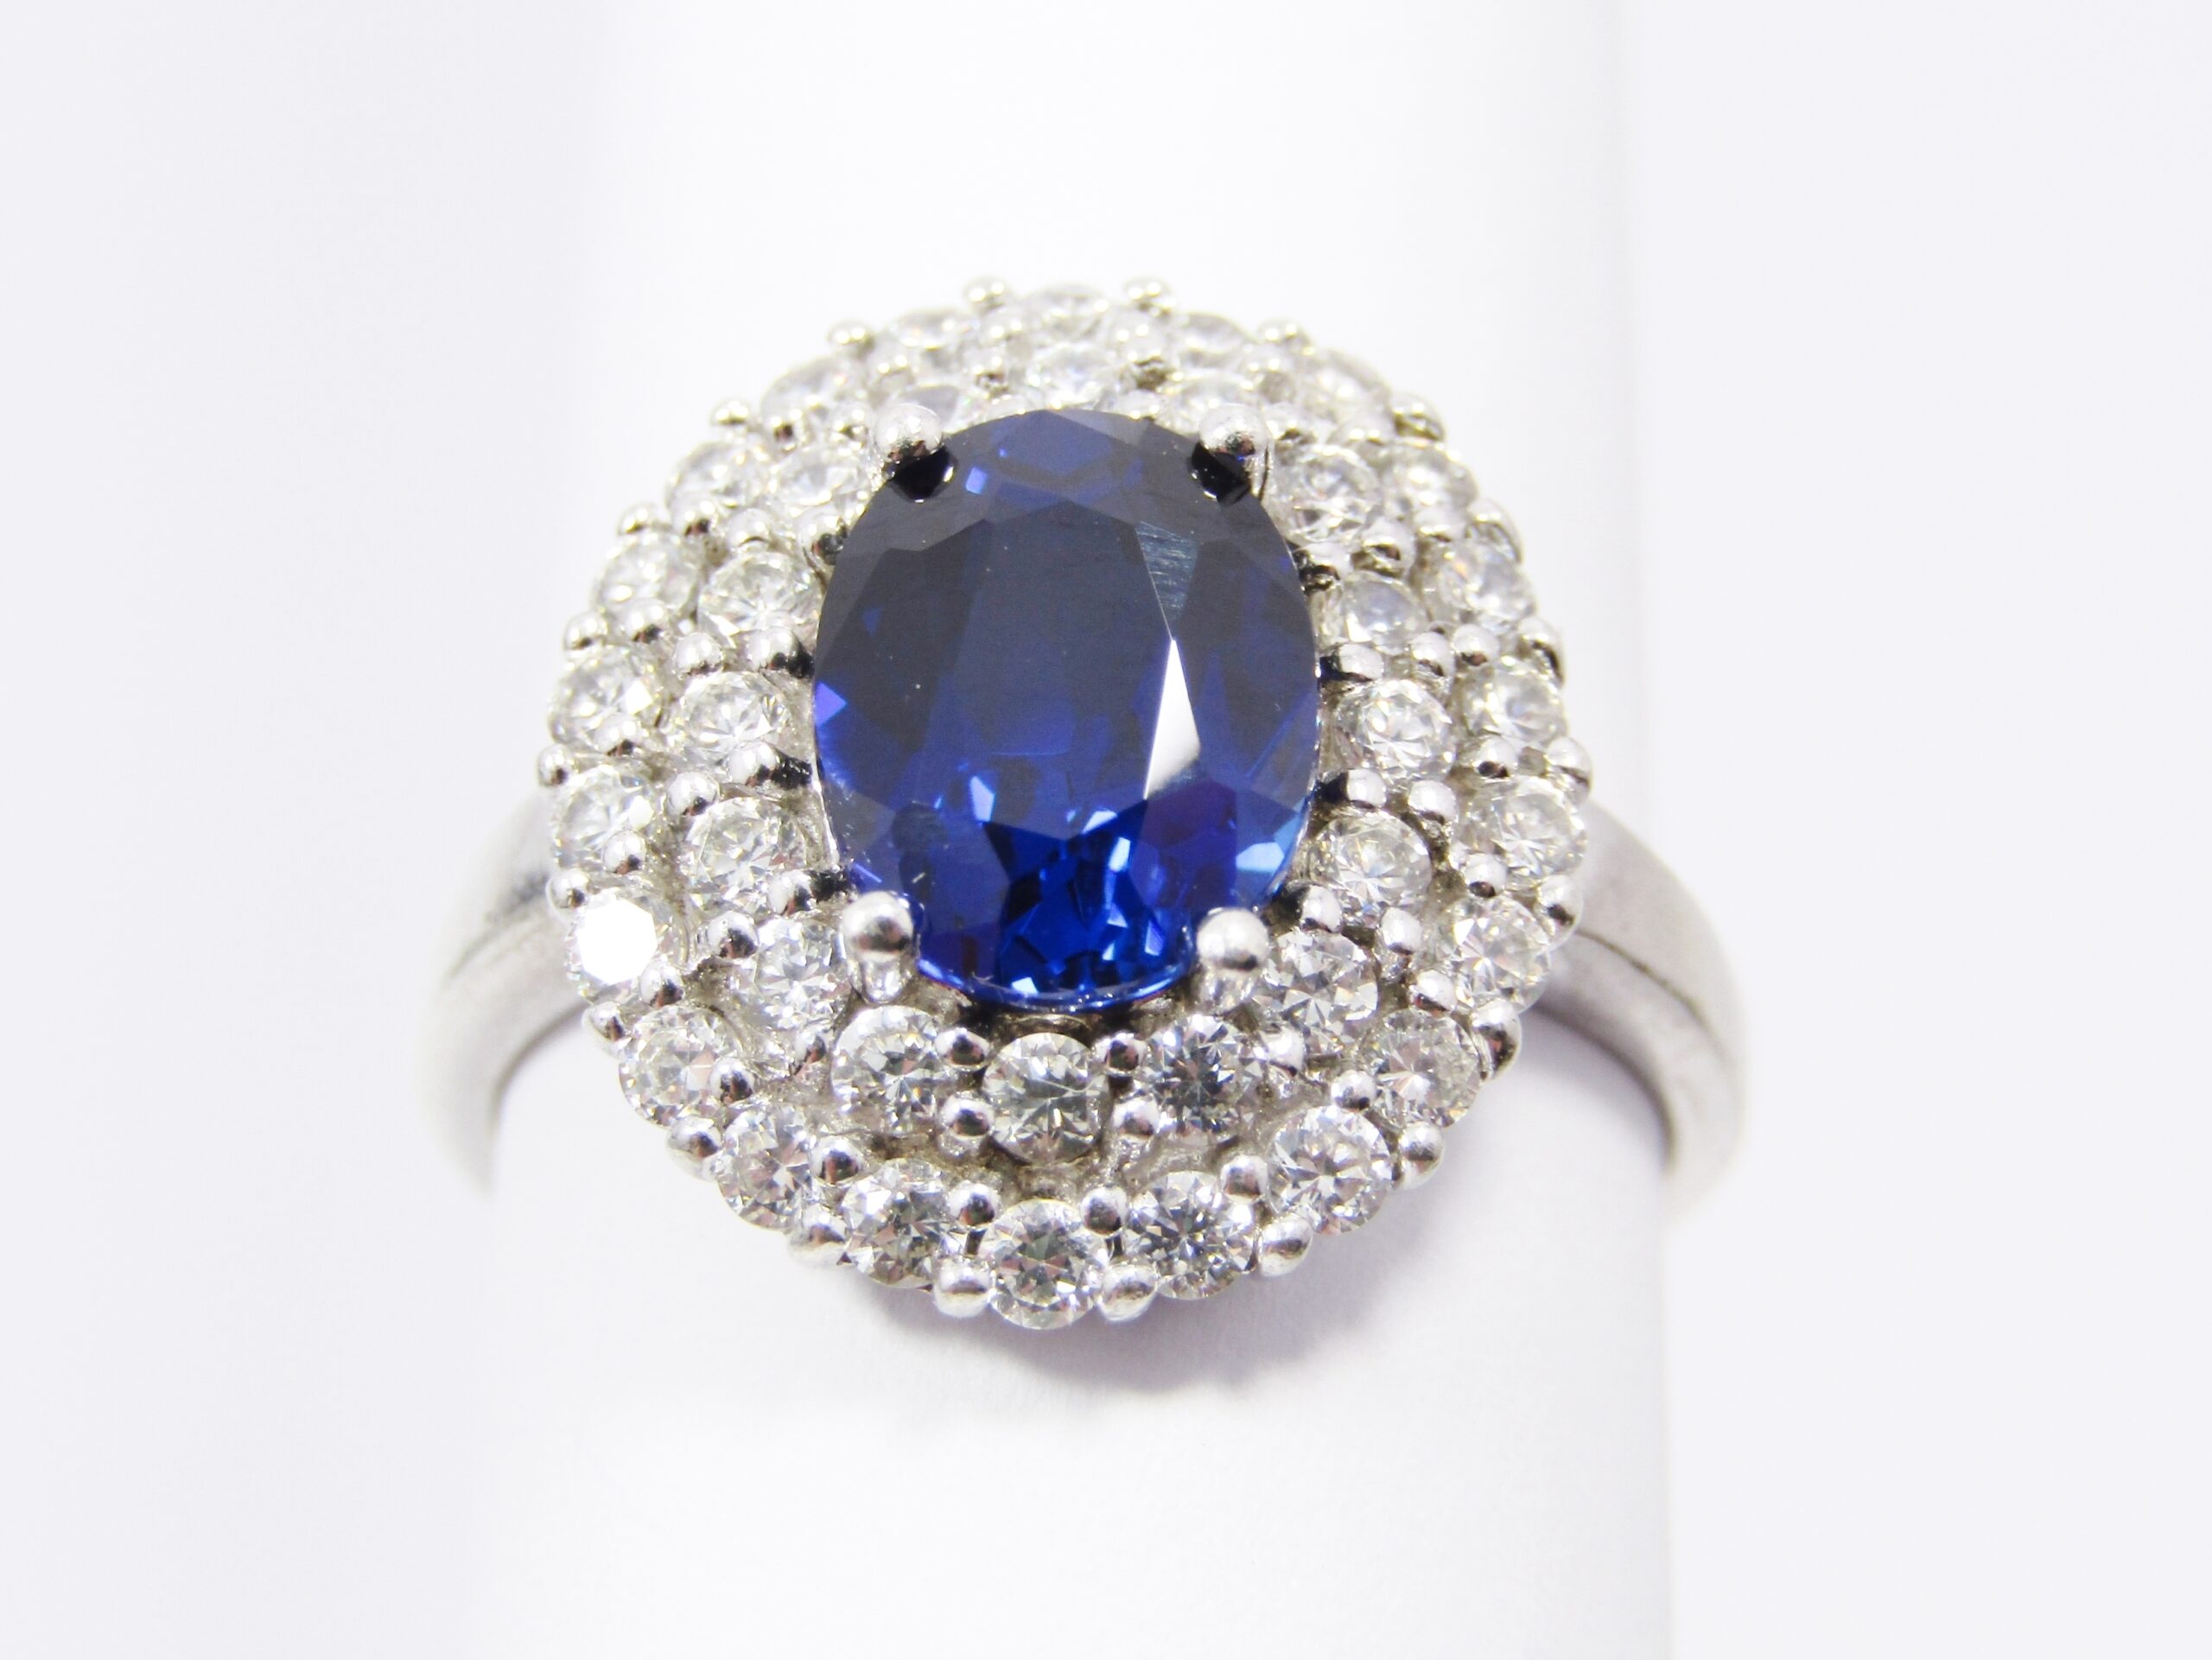 An Amazing Royal Blue Zirconia Ring in Sterling Silver.